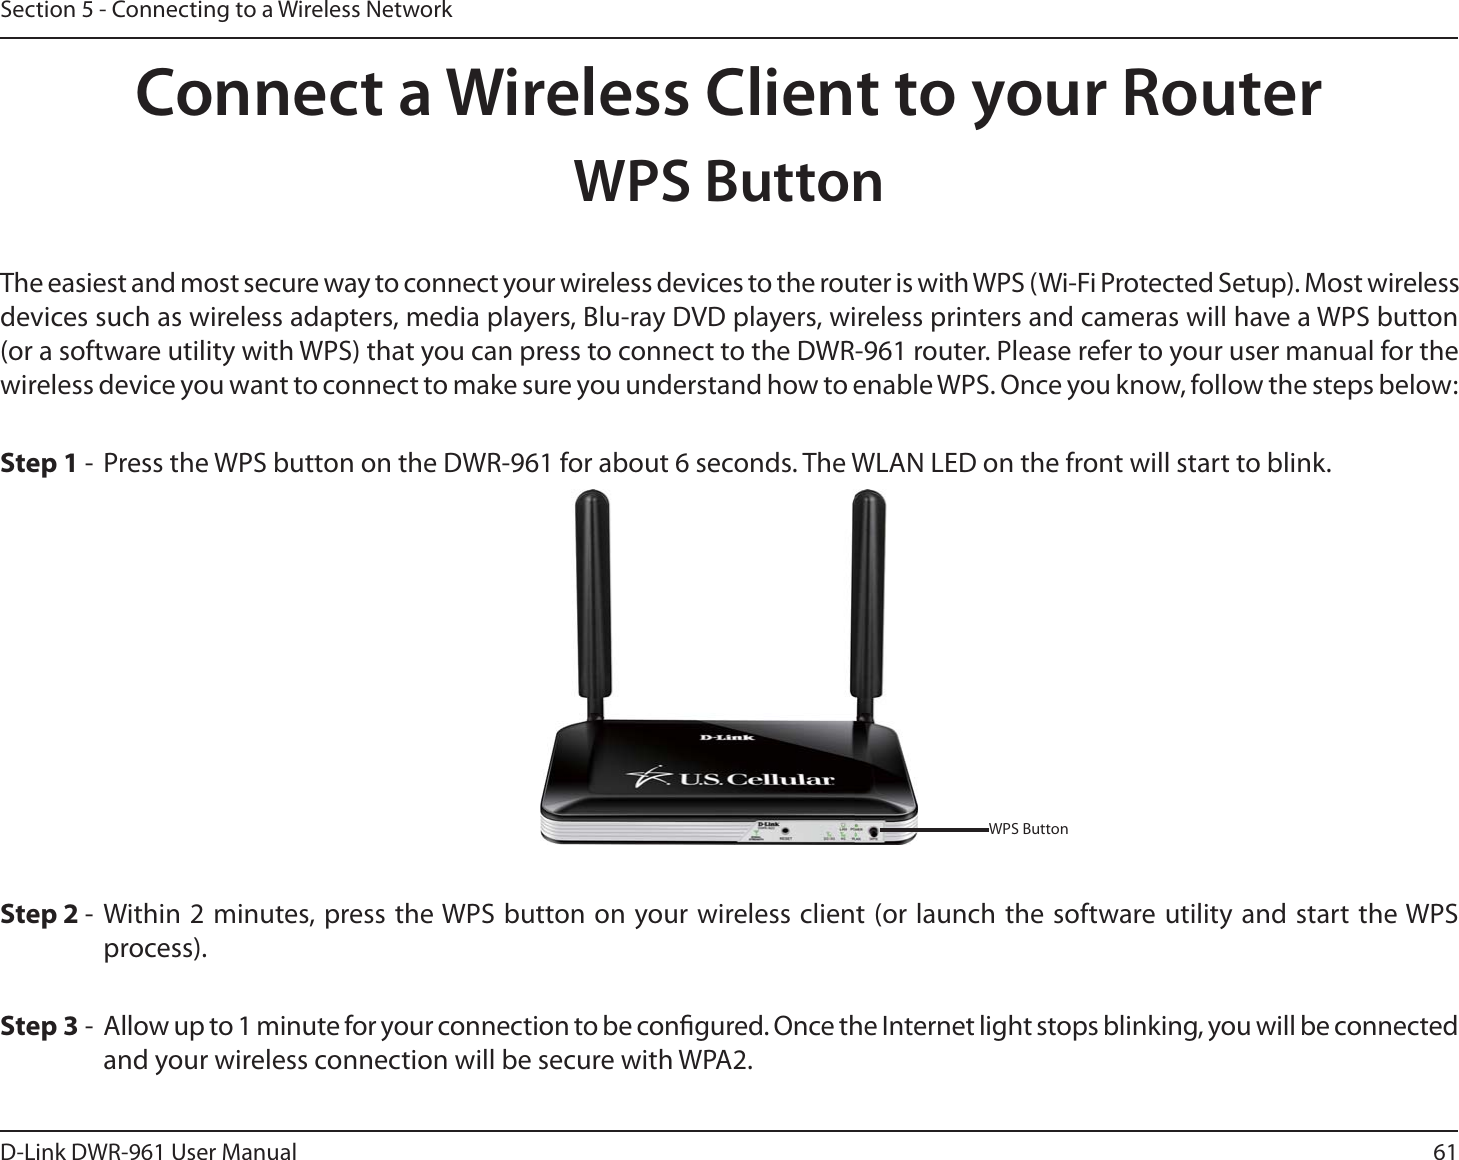 61D-Link DWR-9 User ManualSection 5 - Connecting to a Wireless NetworkConnect a Wireless Client to your RouterWPS ButtonStep 2 - Within 2 minutes, press the WPS button on your wireless client (or launch the software utility and start the WPS process).The easiest and most secure way to connect your wireless devices to the router is with WPS (Wi-Fi Protected Setup). Most wireless devices such as wireless adapters, media players, Blu-ray DVD players, wireless printers and cameras will have a WPS button (or a software utility with WPS) that you can press to connect to the DWR-9 router. Please refer to your user manual for the wireless device you want to connect to make sure you understand how to enable WPS. Once you know, follow the steps below:Step 1 -  Press the WPS button on the DWR-9 for about 6 seconds. The WLAN LED on the front will start to blink.Step 3 -  Allow up to 1 minute for your connection to be congured. Once the Internet light stops blinking, you will be connected and your wireless connection will be secure with WPA2.WPS Button